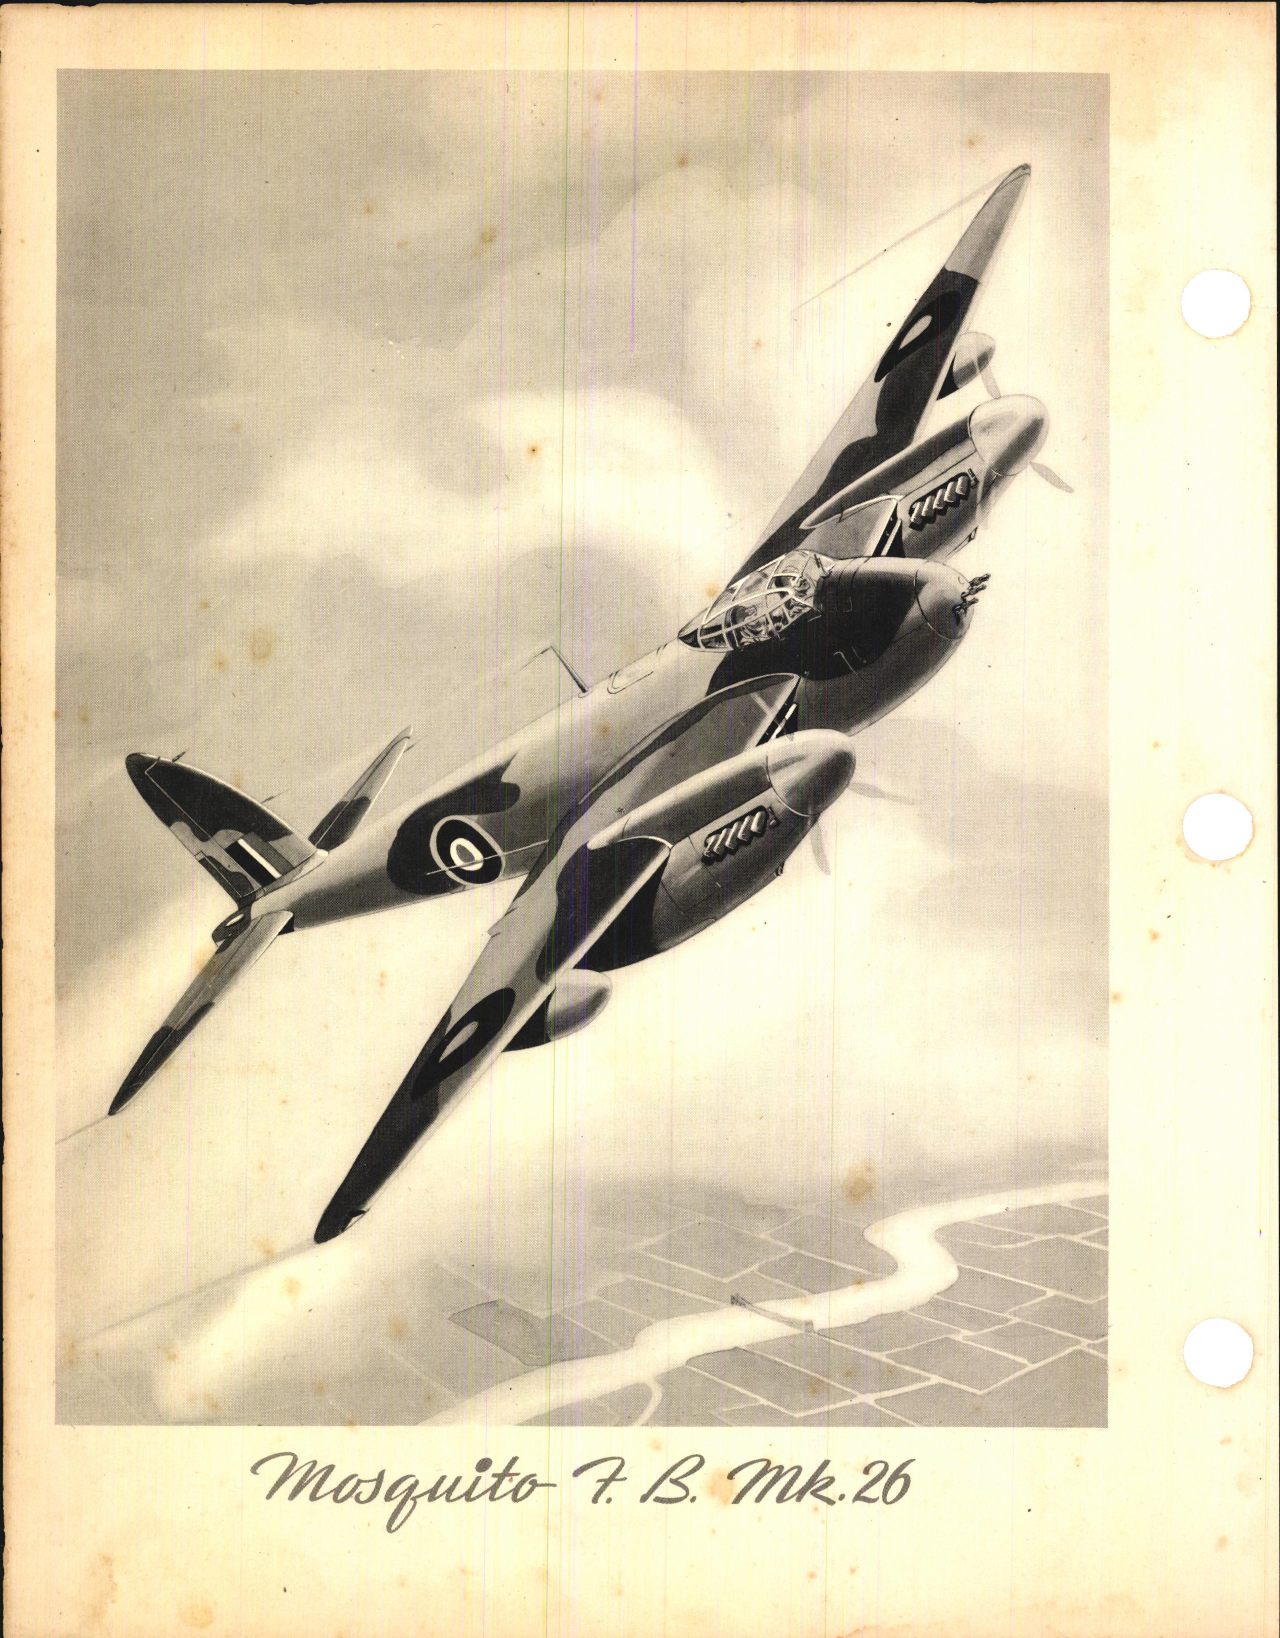 Sample page 6 from AirCorps Library document: Servicing and Descriptive Handbook for F.B. Mk. 26 Mosquito